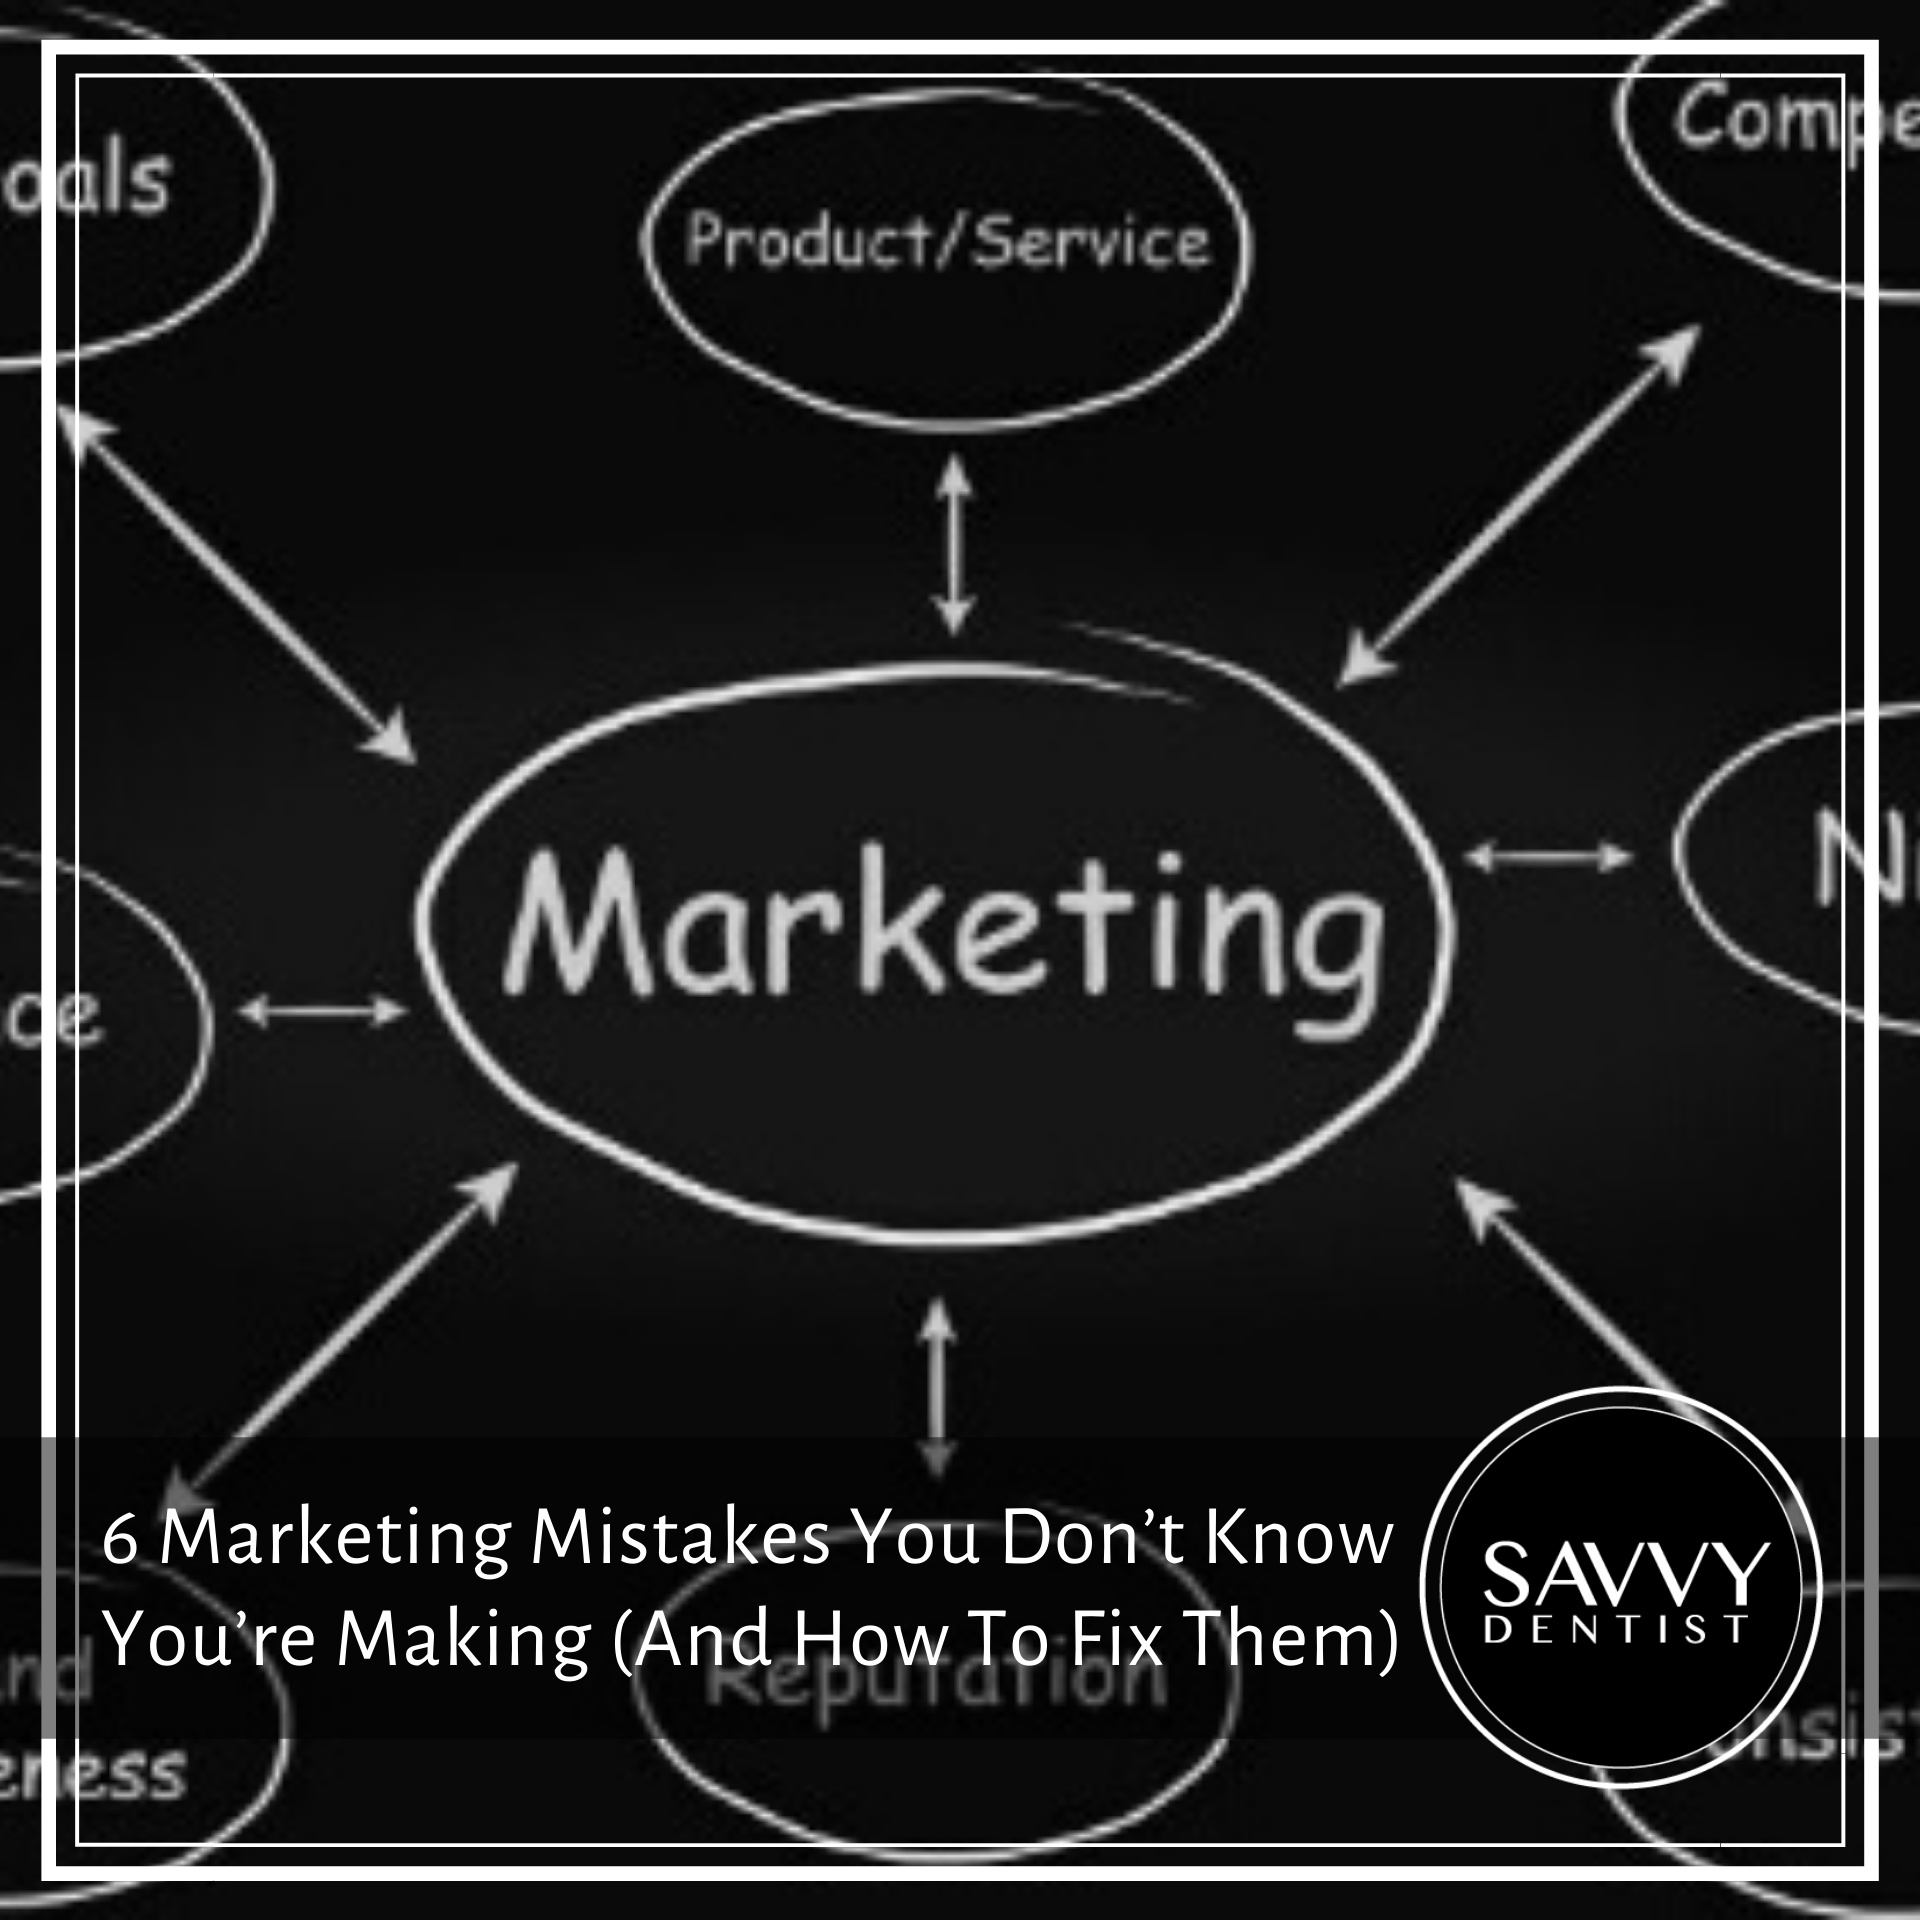 6 Marketing Mistakes You Don’t Know You’re Making (And How To Fix Them)